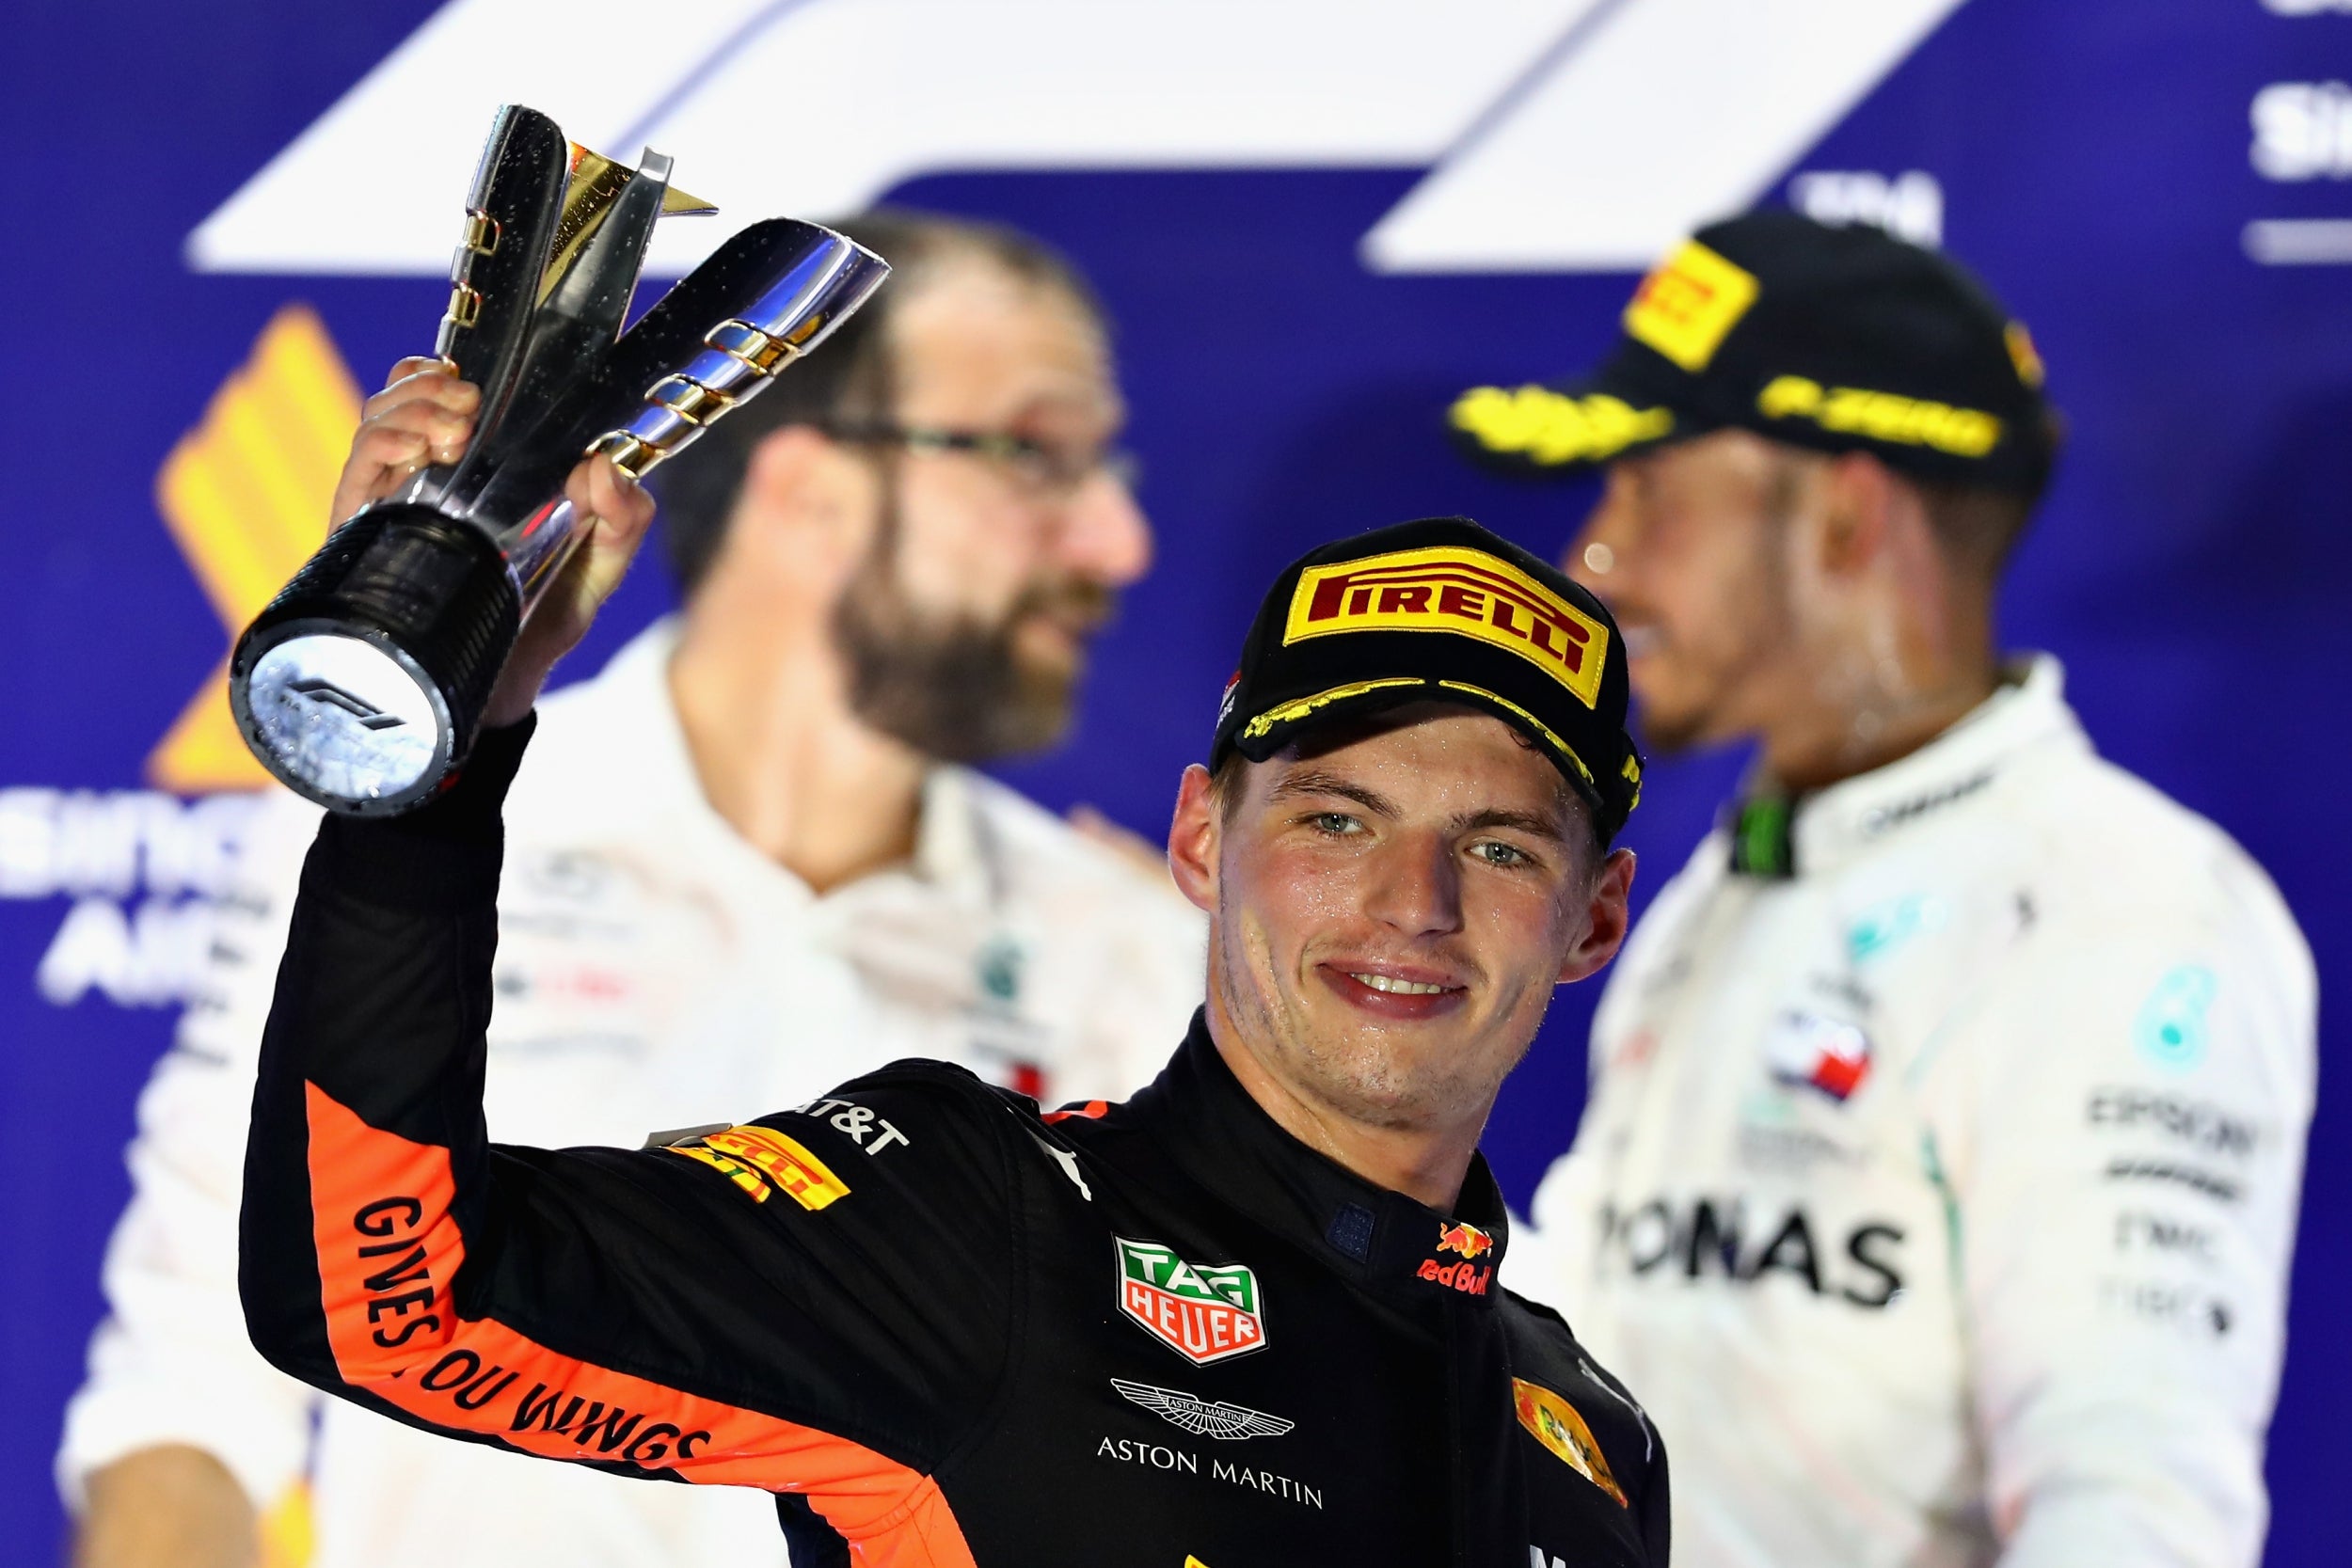 Verstappen was deservedly delighted with second place